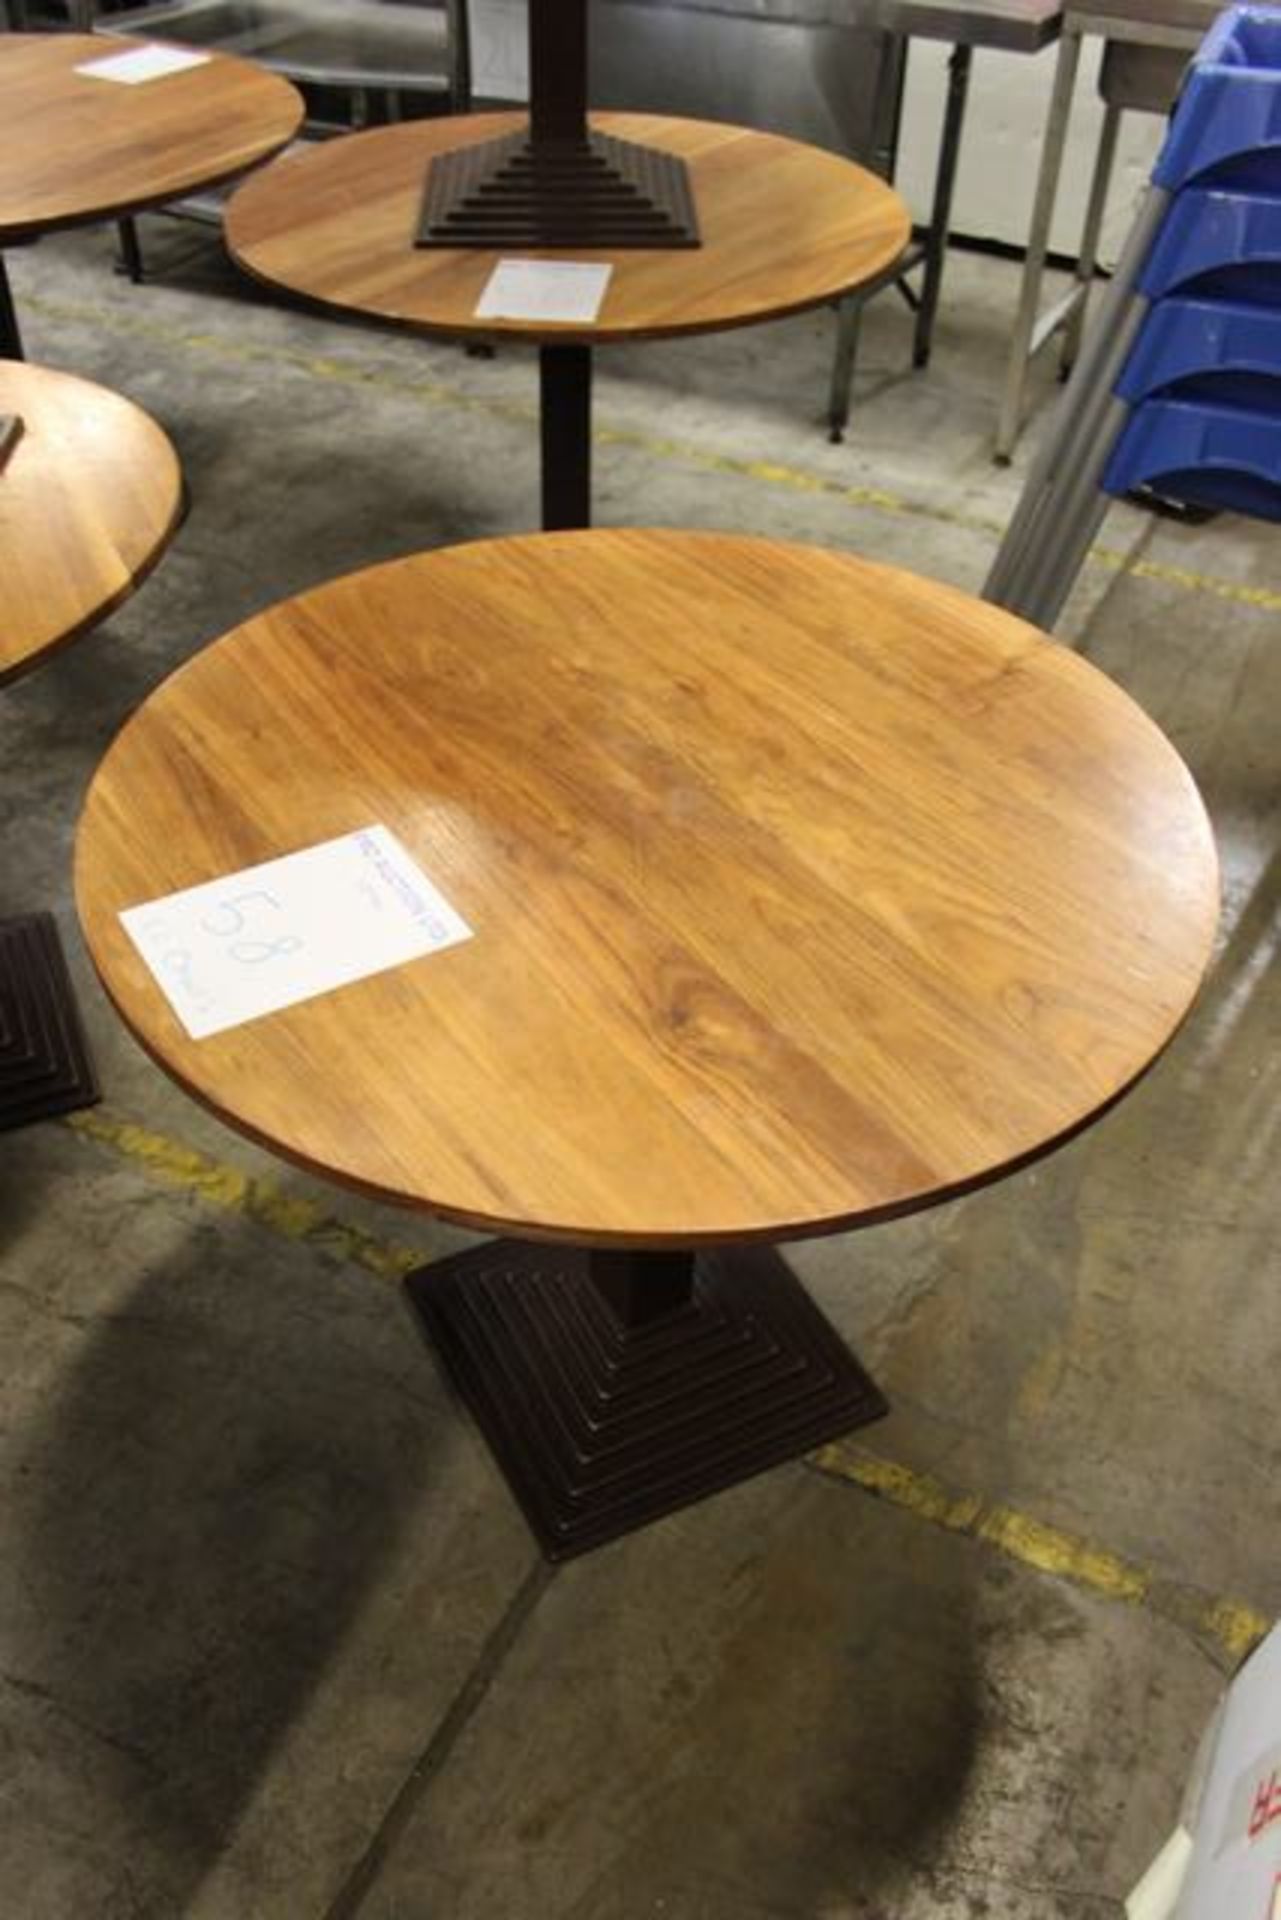 Round dining table 900mm diameter on black cast iron base complete with two dining chairs wooden